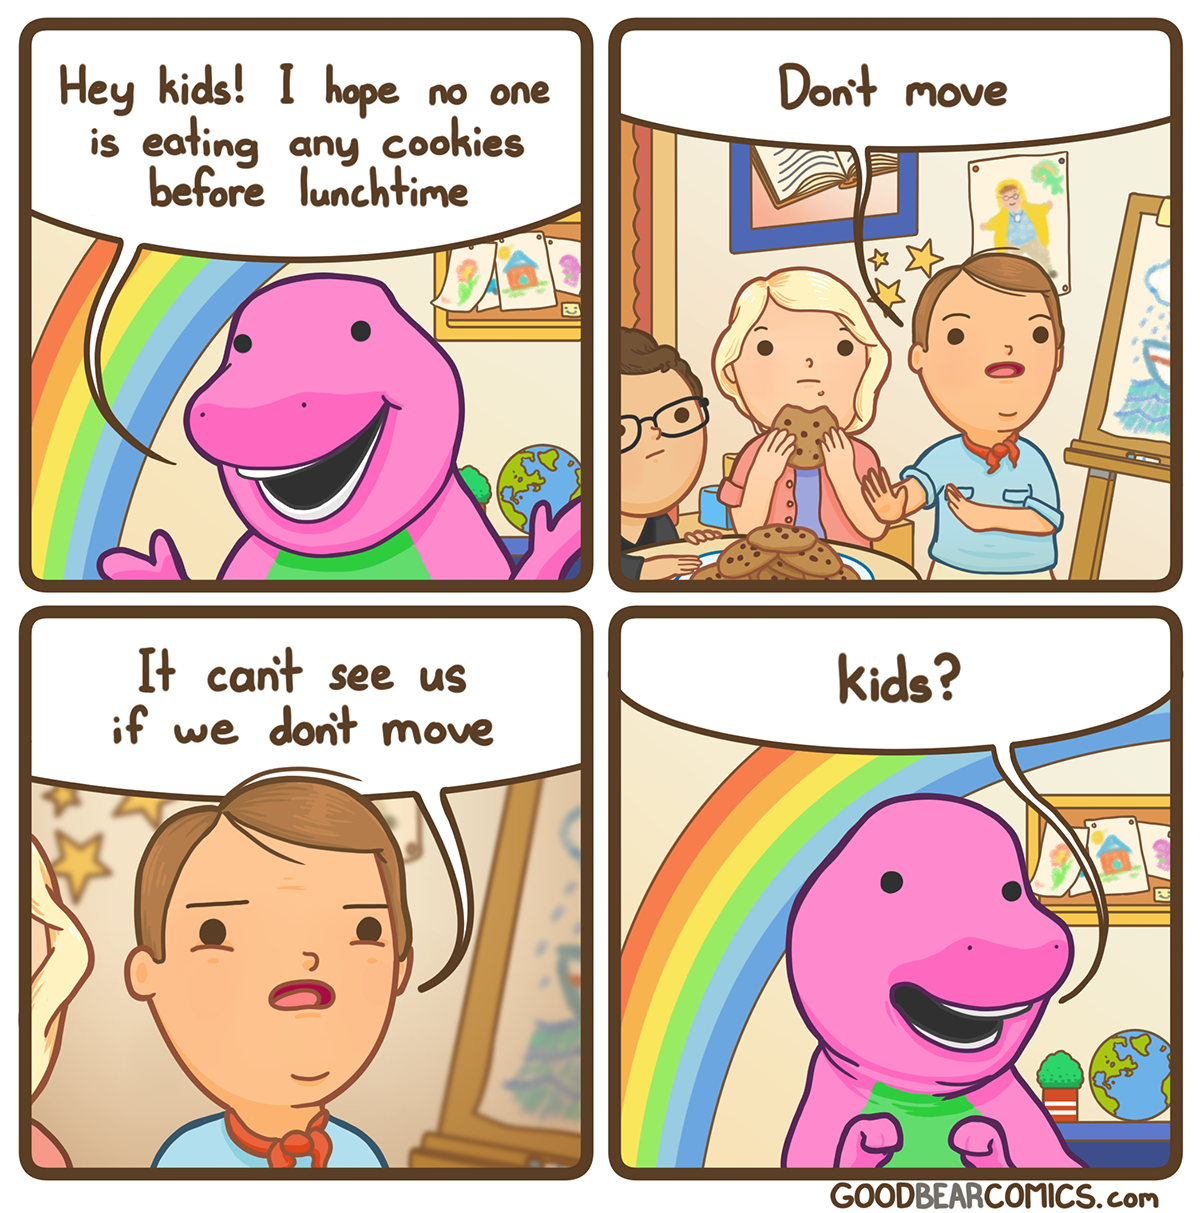 memes - barney can t see us if we don t move - Don't move Hey kids! I hope no one is eating any cookies before lunchtime It can't see us if we don't move kids? Goodbearcomics.com